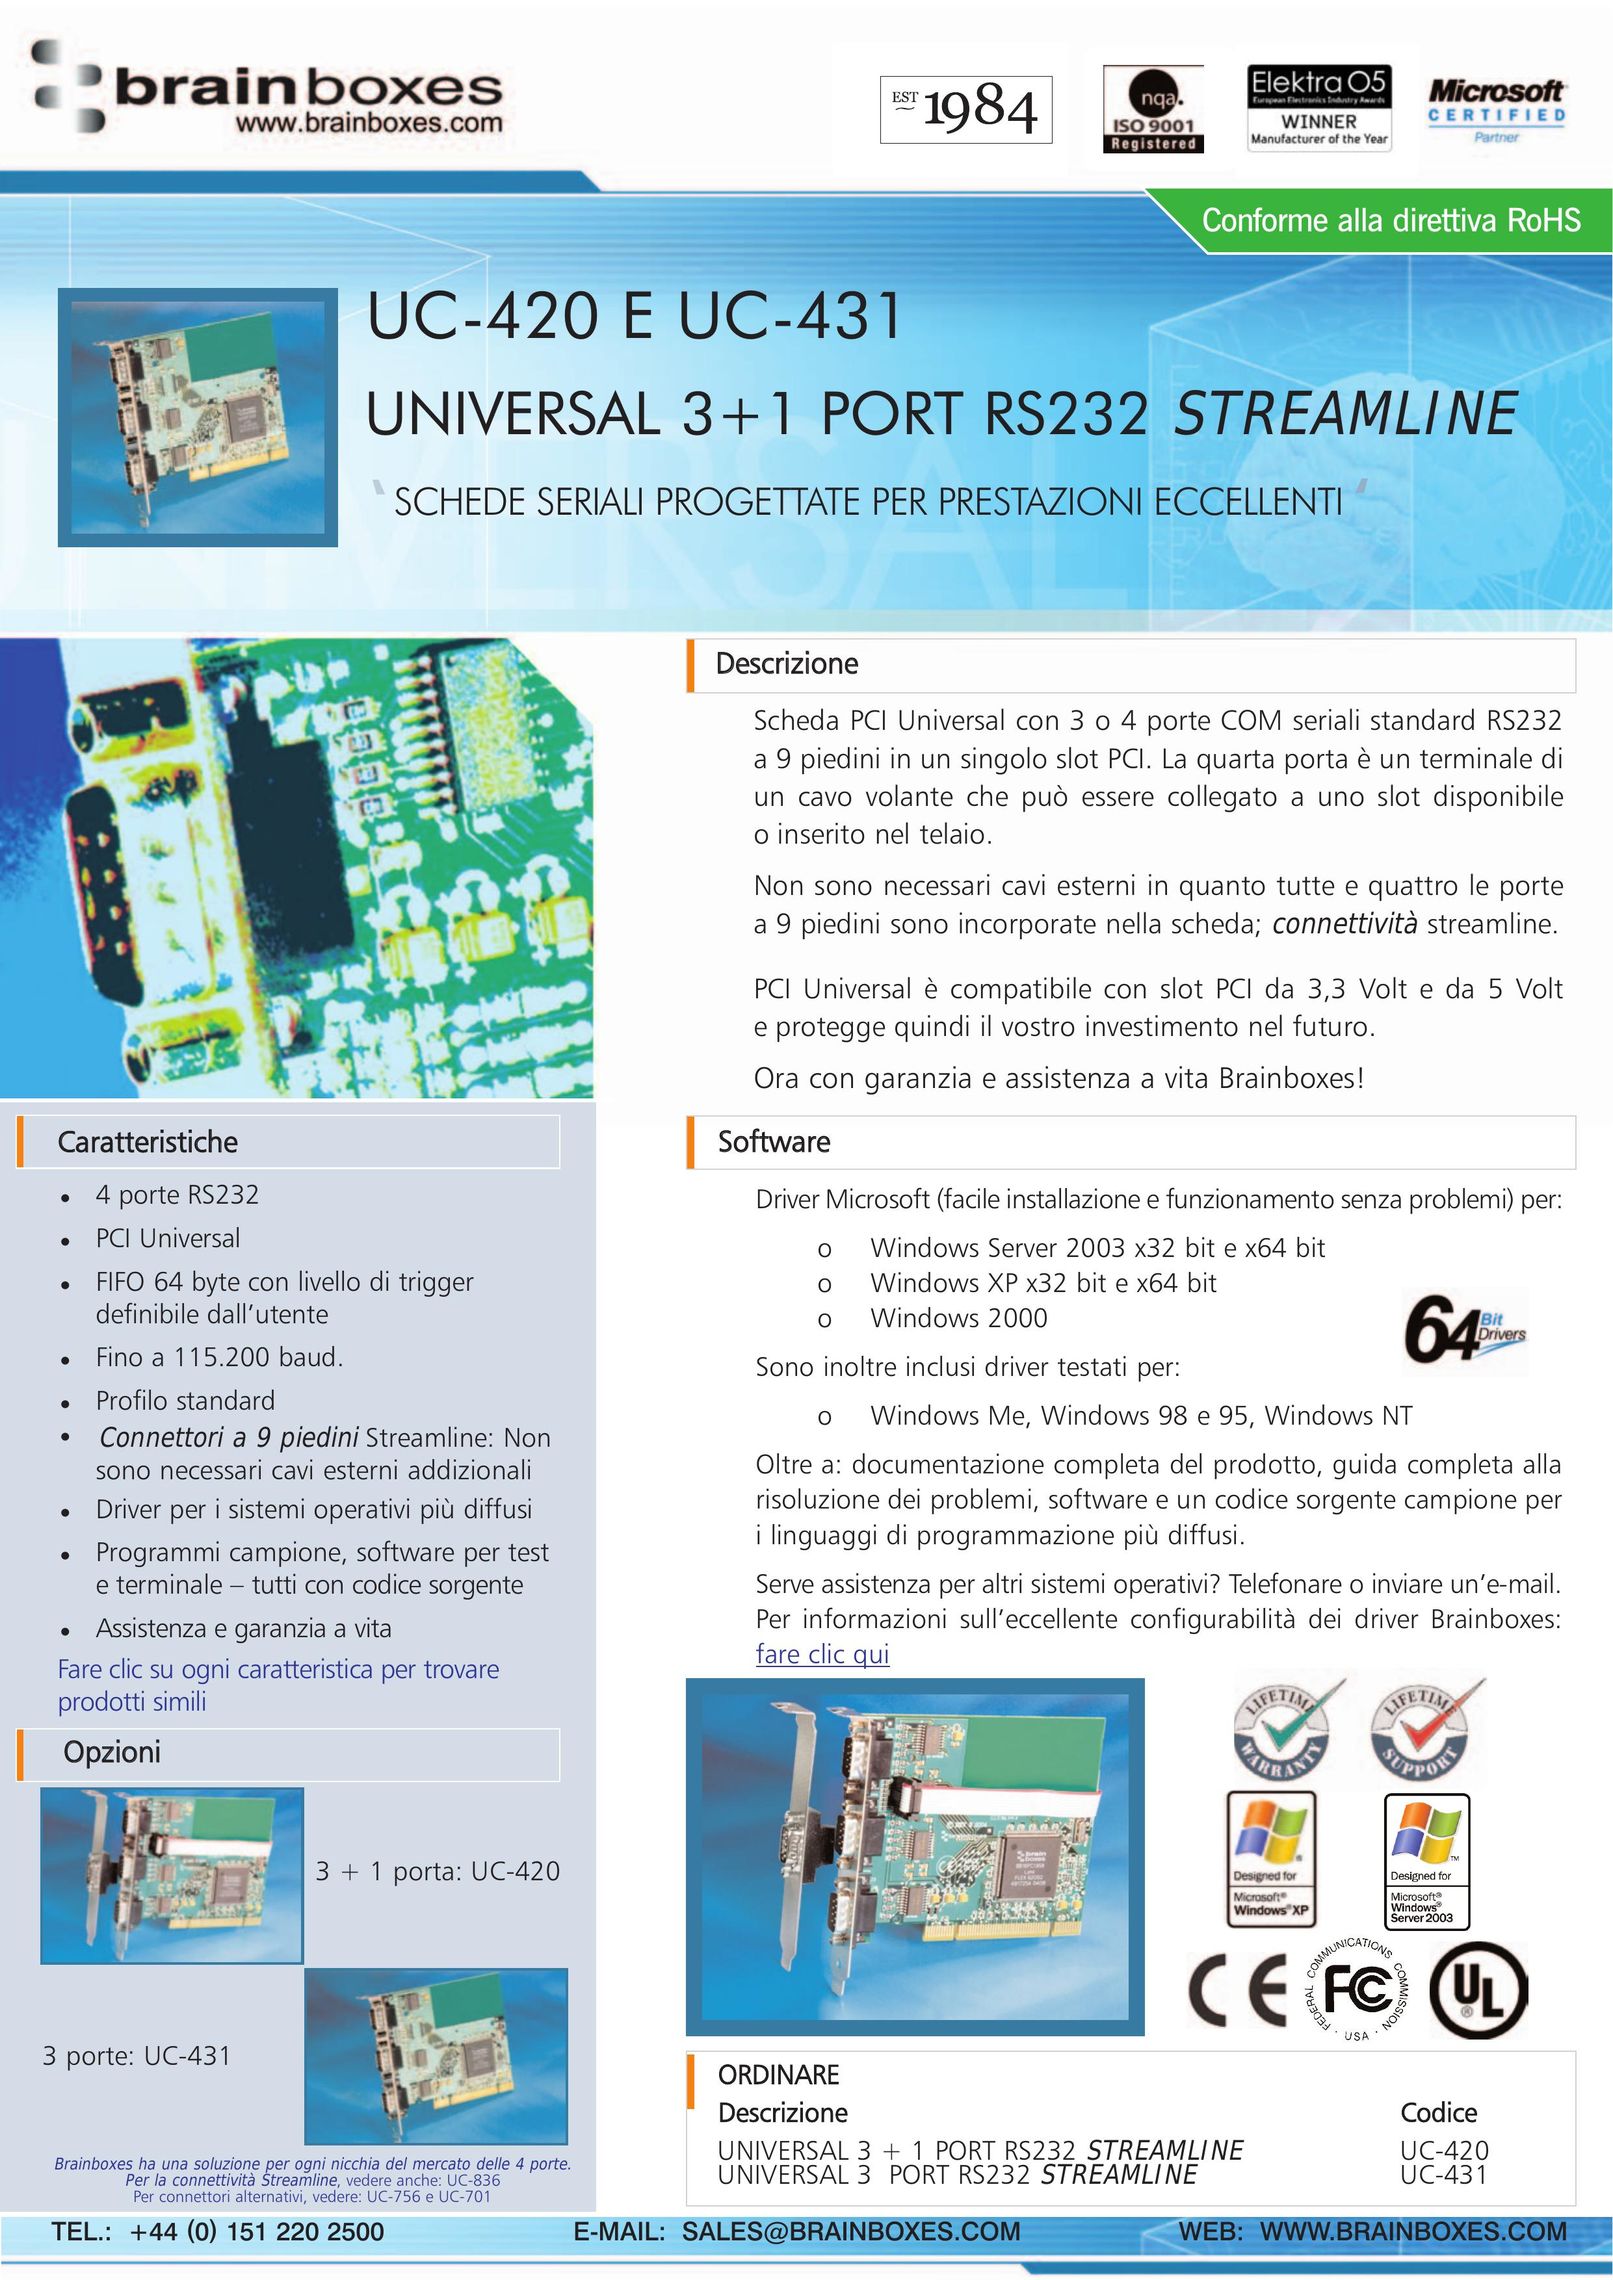 Brainboxes UC-431 Network Card User Manual